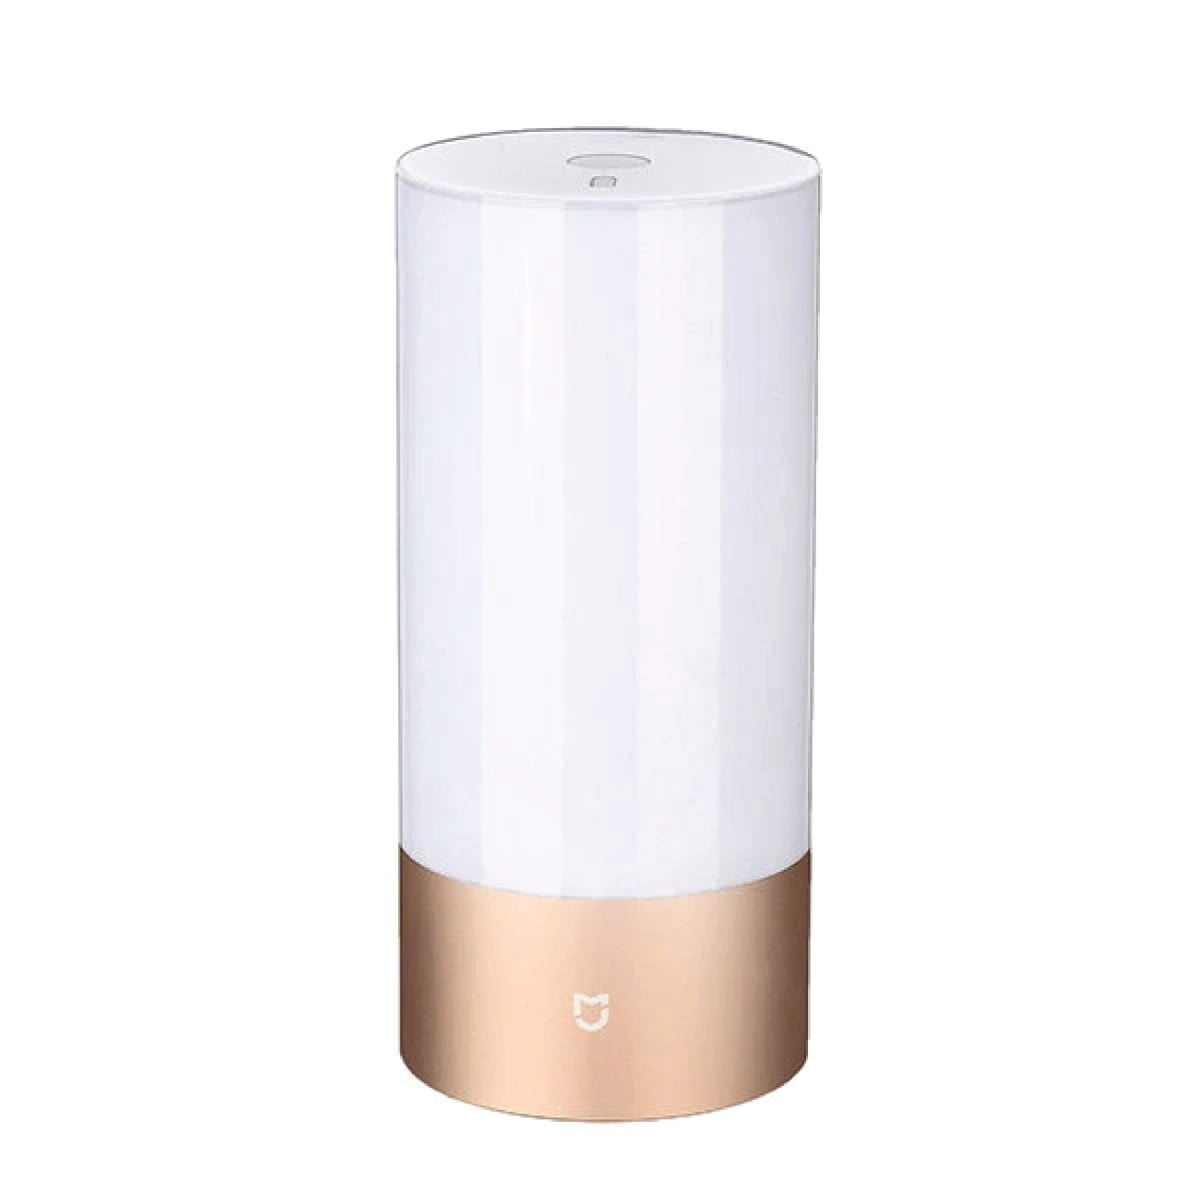 Untitled 2 09 Xiaomi Illuminate Your Home With These Energy-Efficient Bulbs. High Efficient Reflector Provides Excellent Brightness. It Will Suit Your Room Size And Décor. Help Save Energy [Embed]Https://Www.youtube.com/Watch?V=Rkk-Hf64Ihe[/Embed] Mi Bedside Lamp Mi Bedside Lamp (Mjctd01Yl) Led Bluetooth Wifi Control